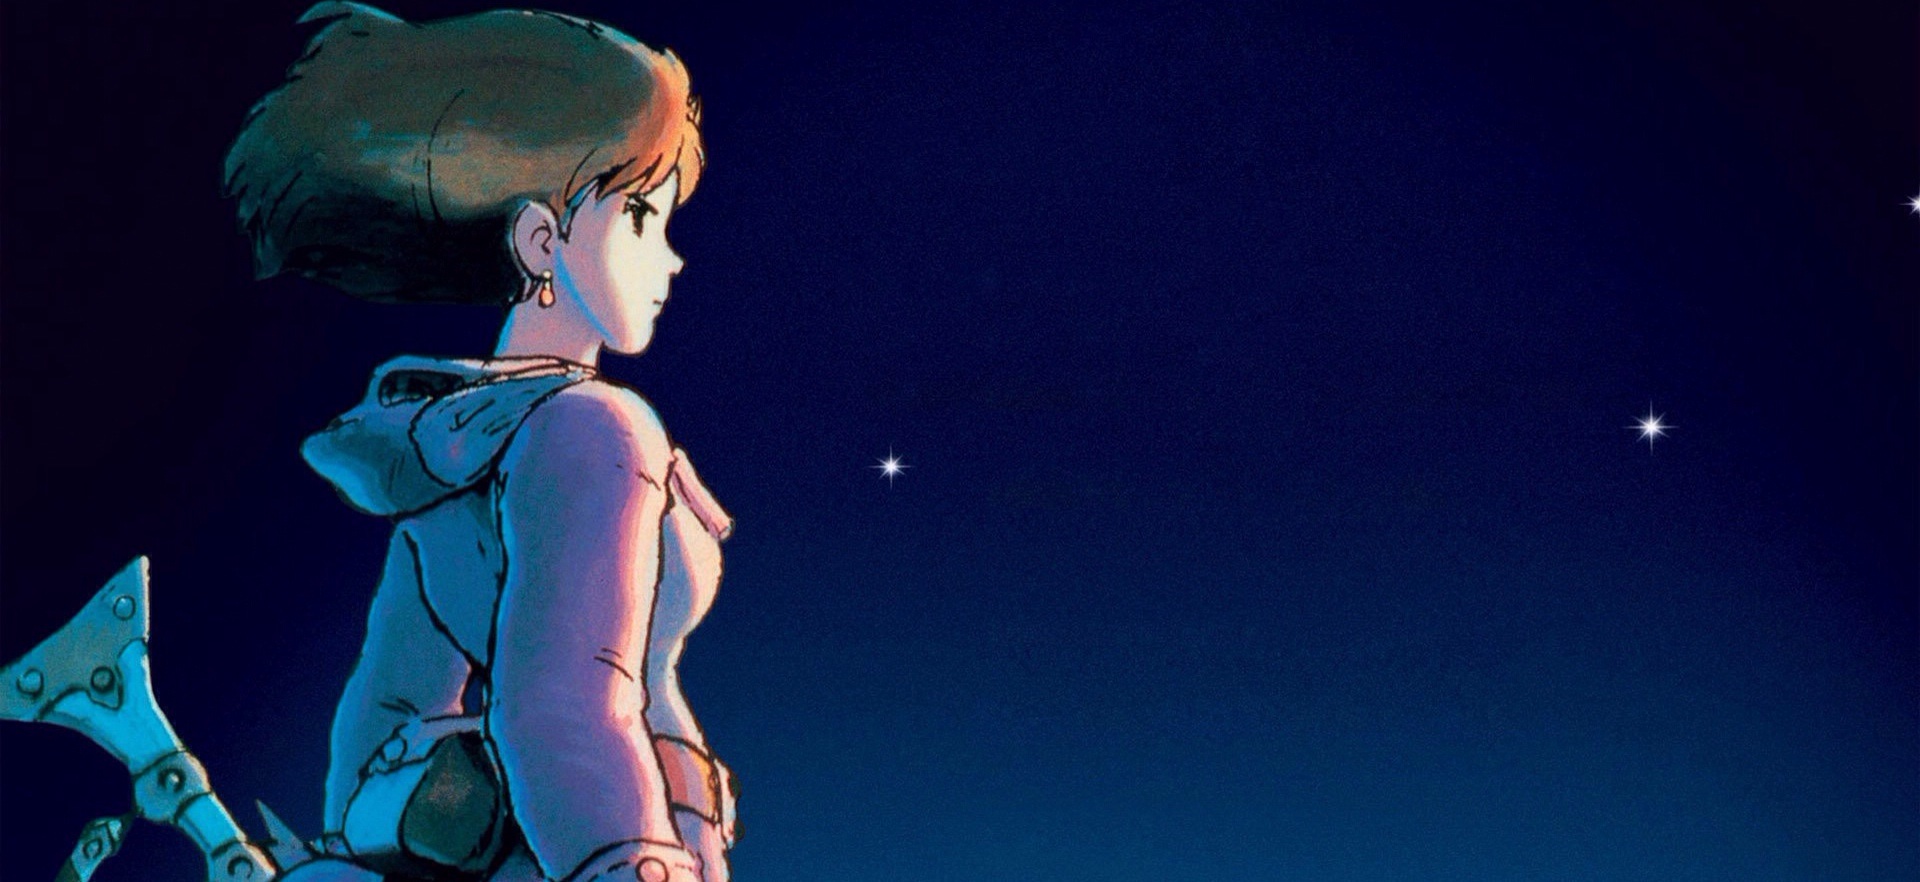 Nausicaä of the Valley of the Wind Blu-ray Steelbook is coming to the UK